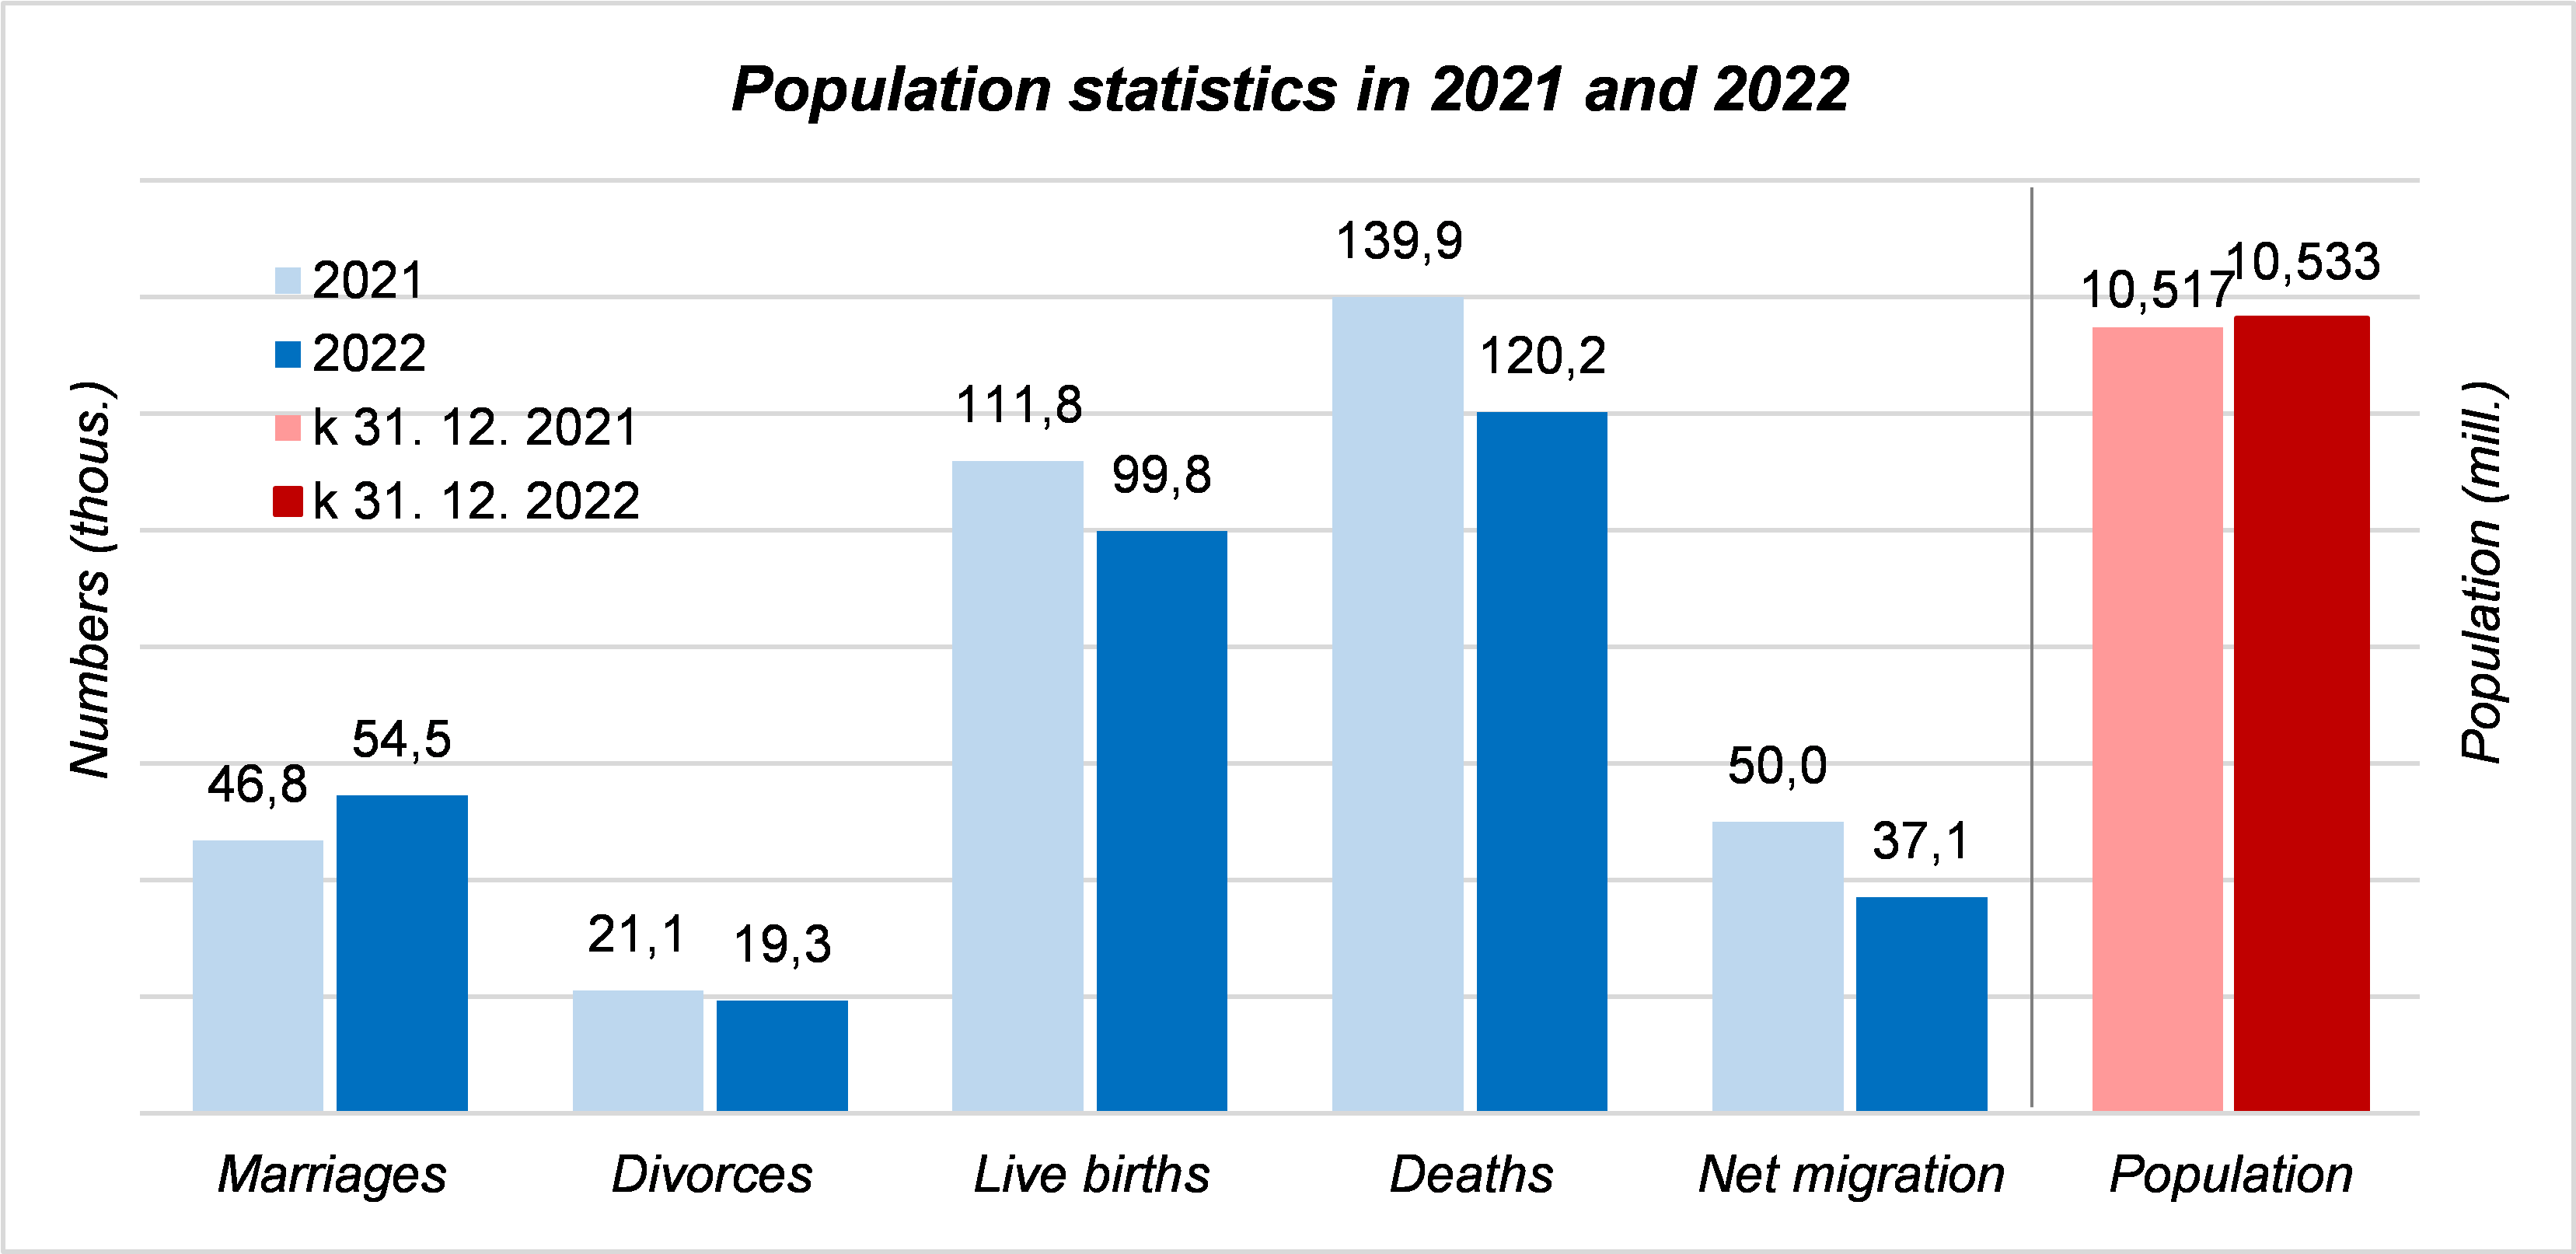 Population statistics in 2021 and 2022